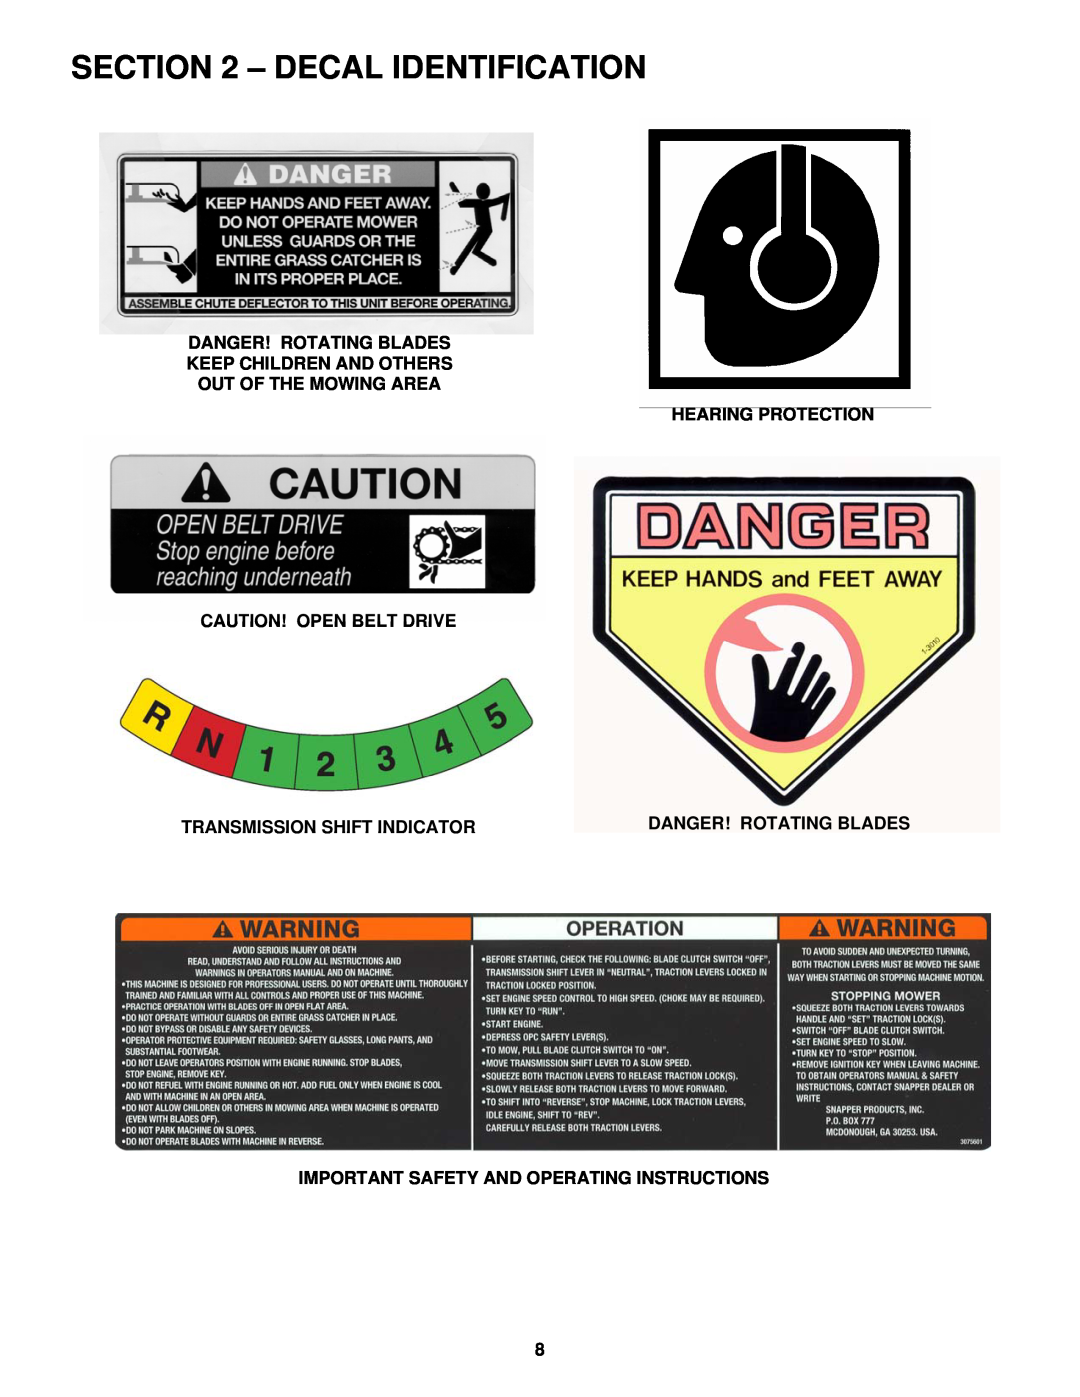 Snapper SGV13321KW Decal Identification, Danger! Rotating Blades Keep Children And Others, Transmission Shift Indicator 